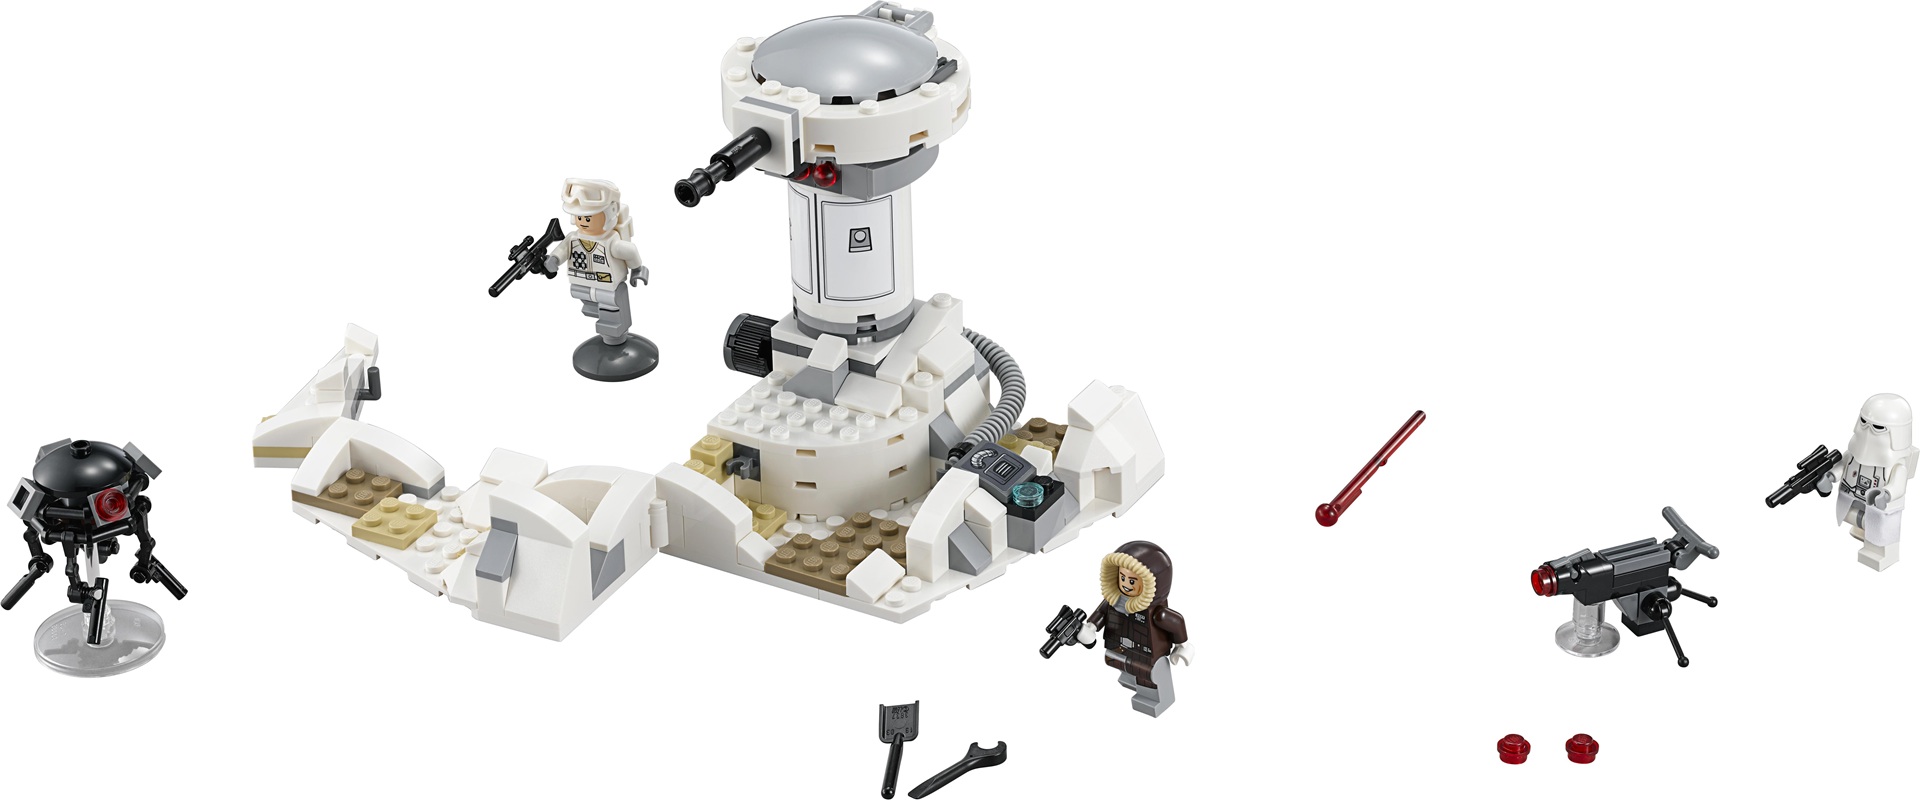 Two New Star Wars LEGO Sets Coming In 2016